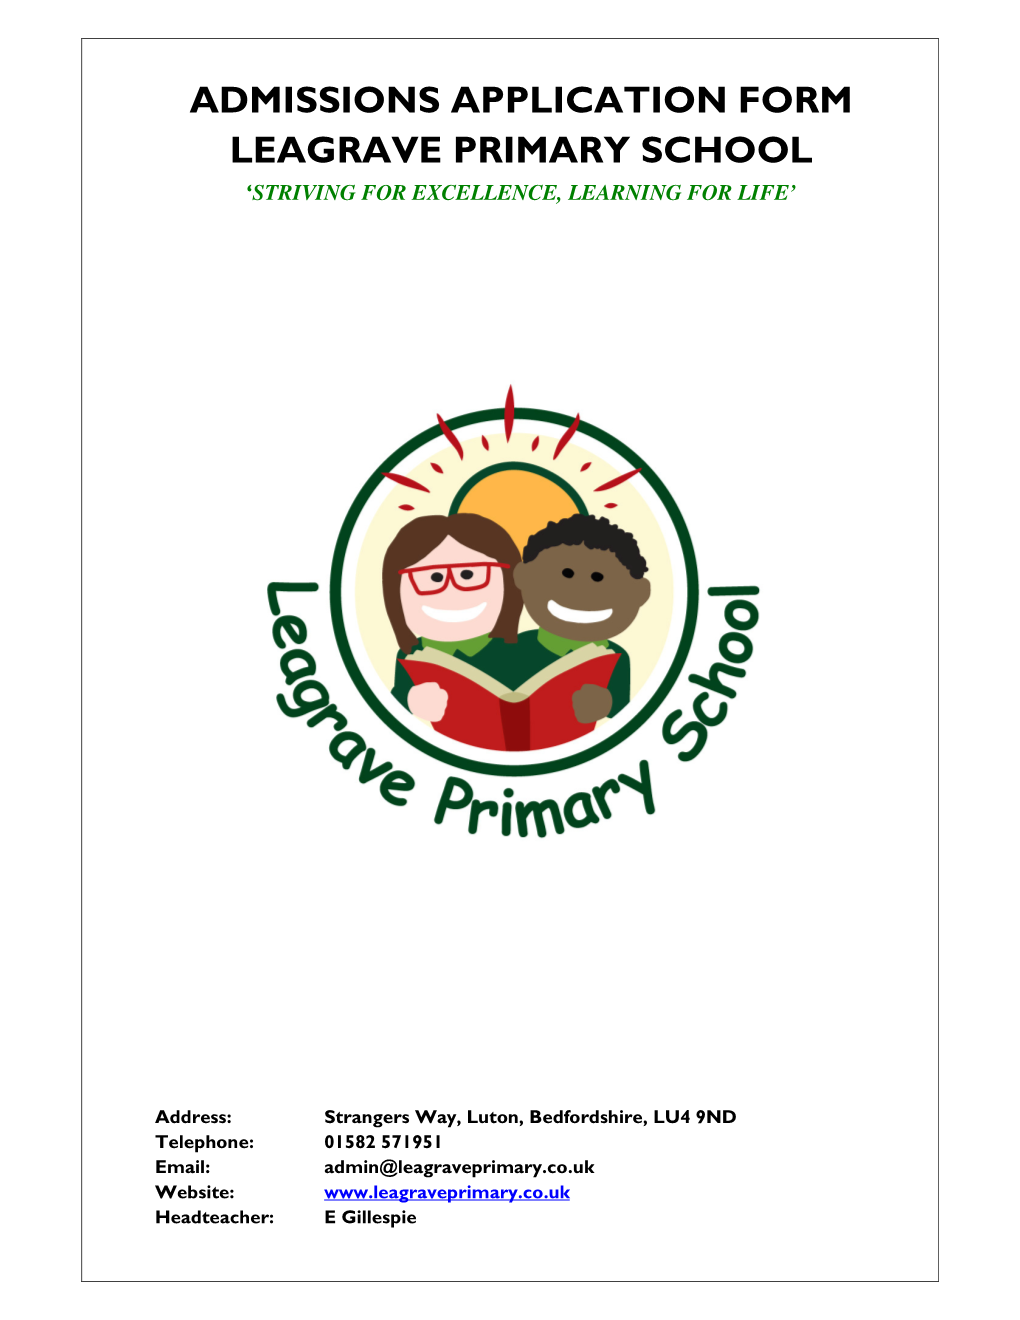 Admissions Application Form Leagrave Primary School ‘Striving for Excellence, Learning for Life’